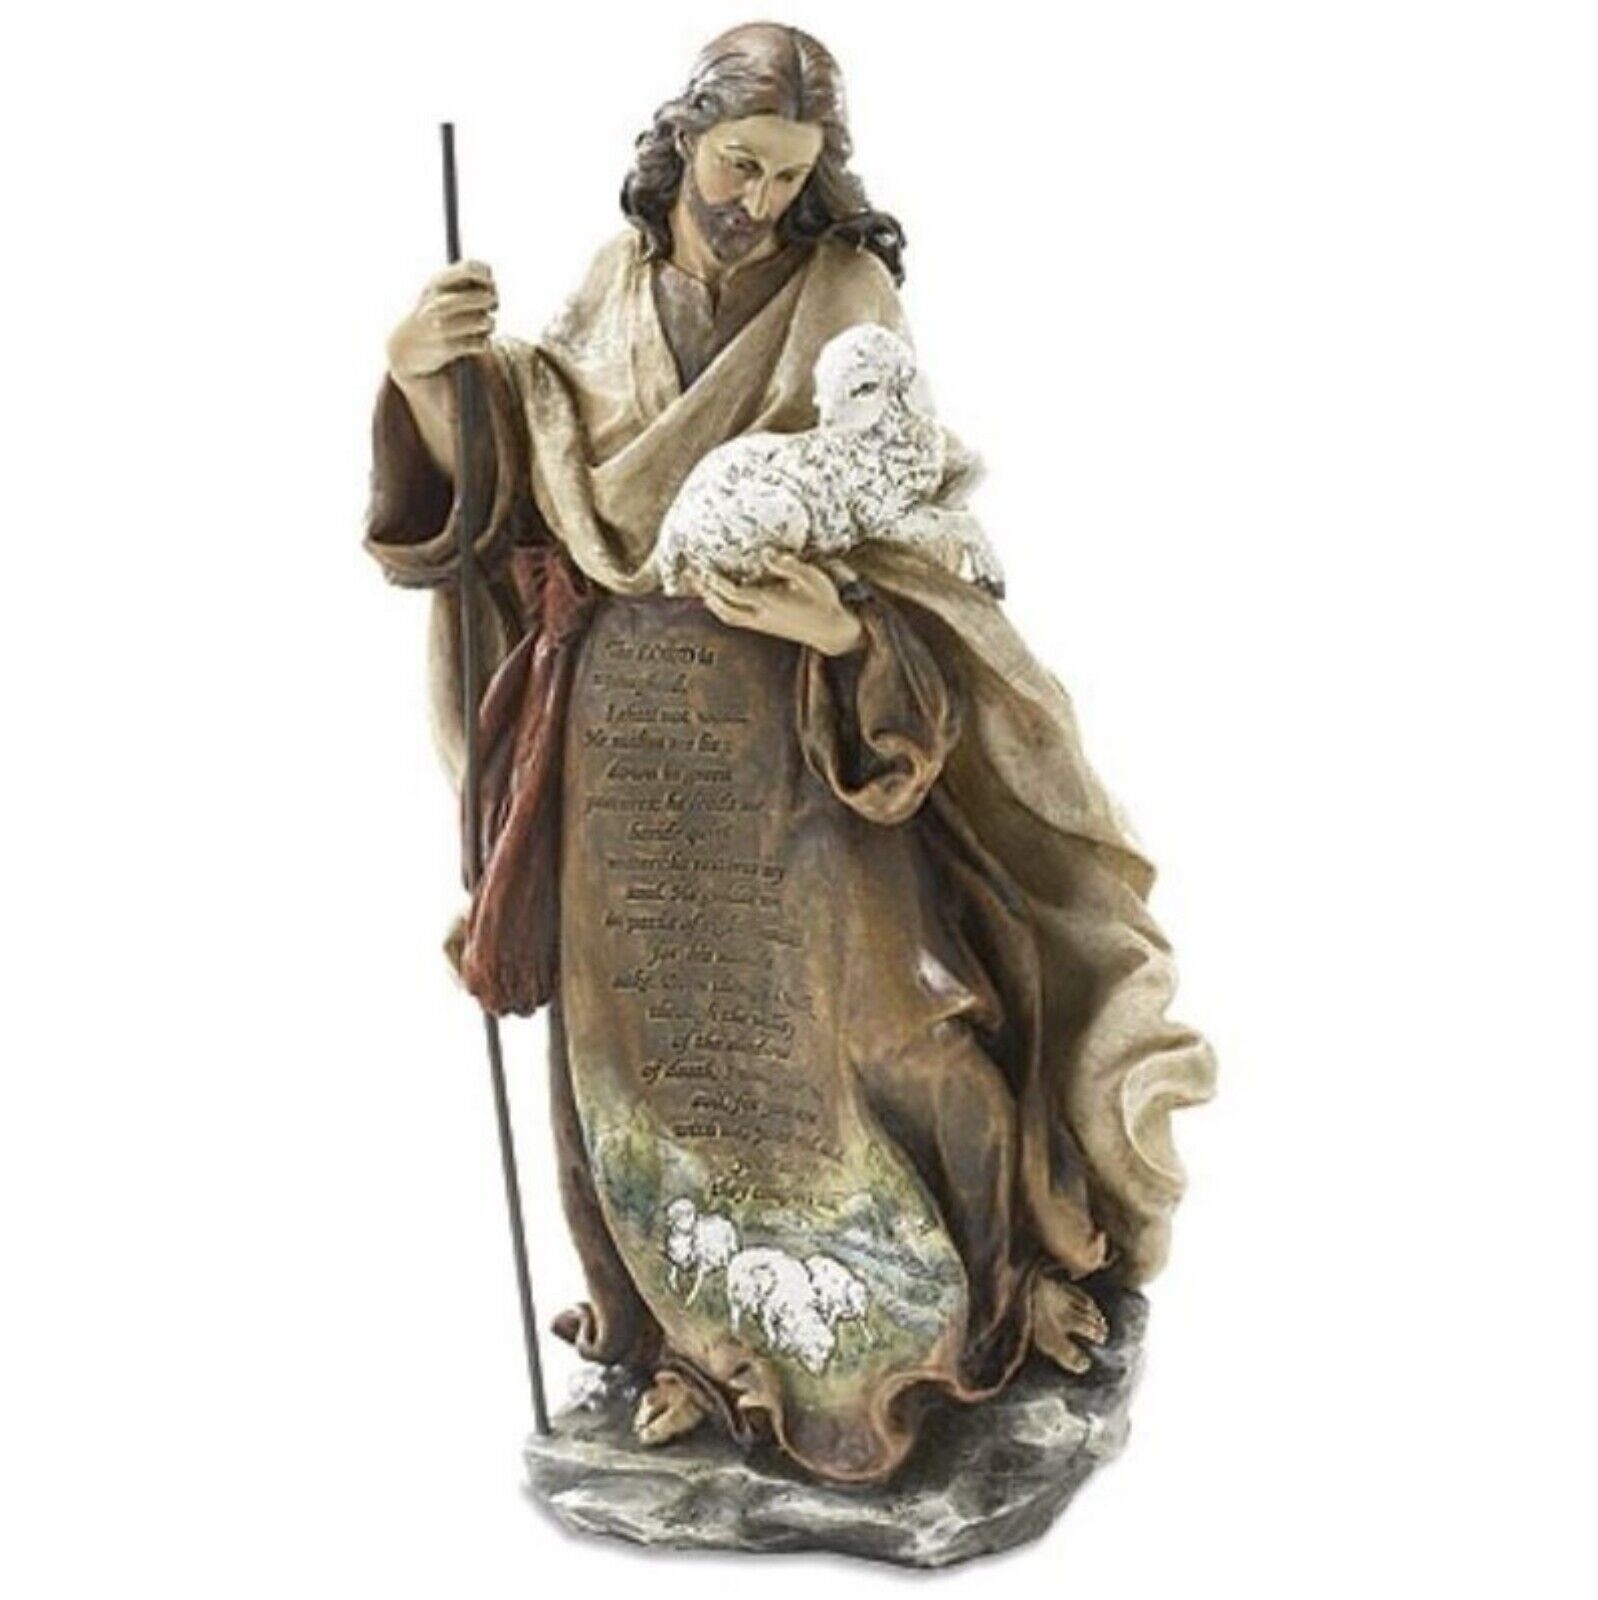 The Good Shepherd Holding Lamb Statue Figurine with Inscription,12 1/4 Inch